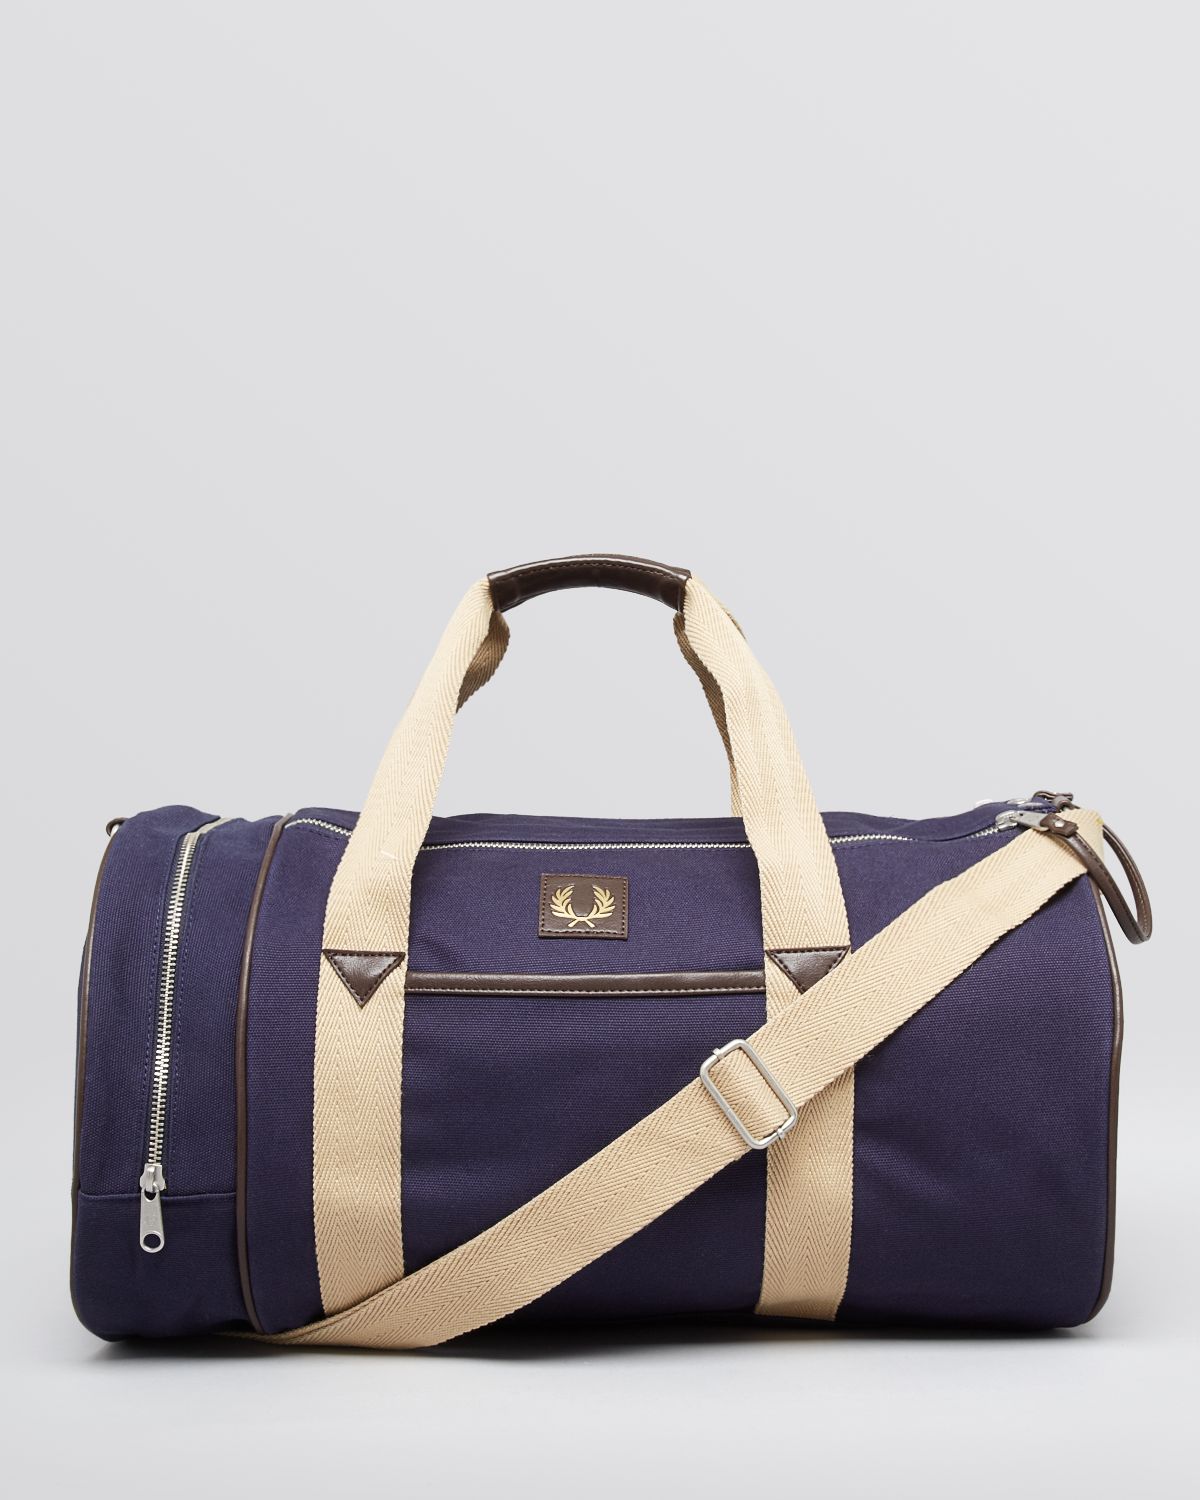 Lyst - Fred perry Classic Canvas Barrel Bag in Blue for Men